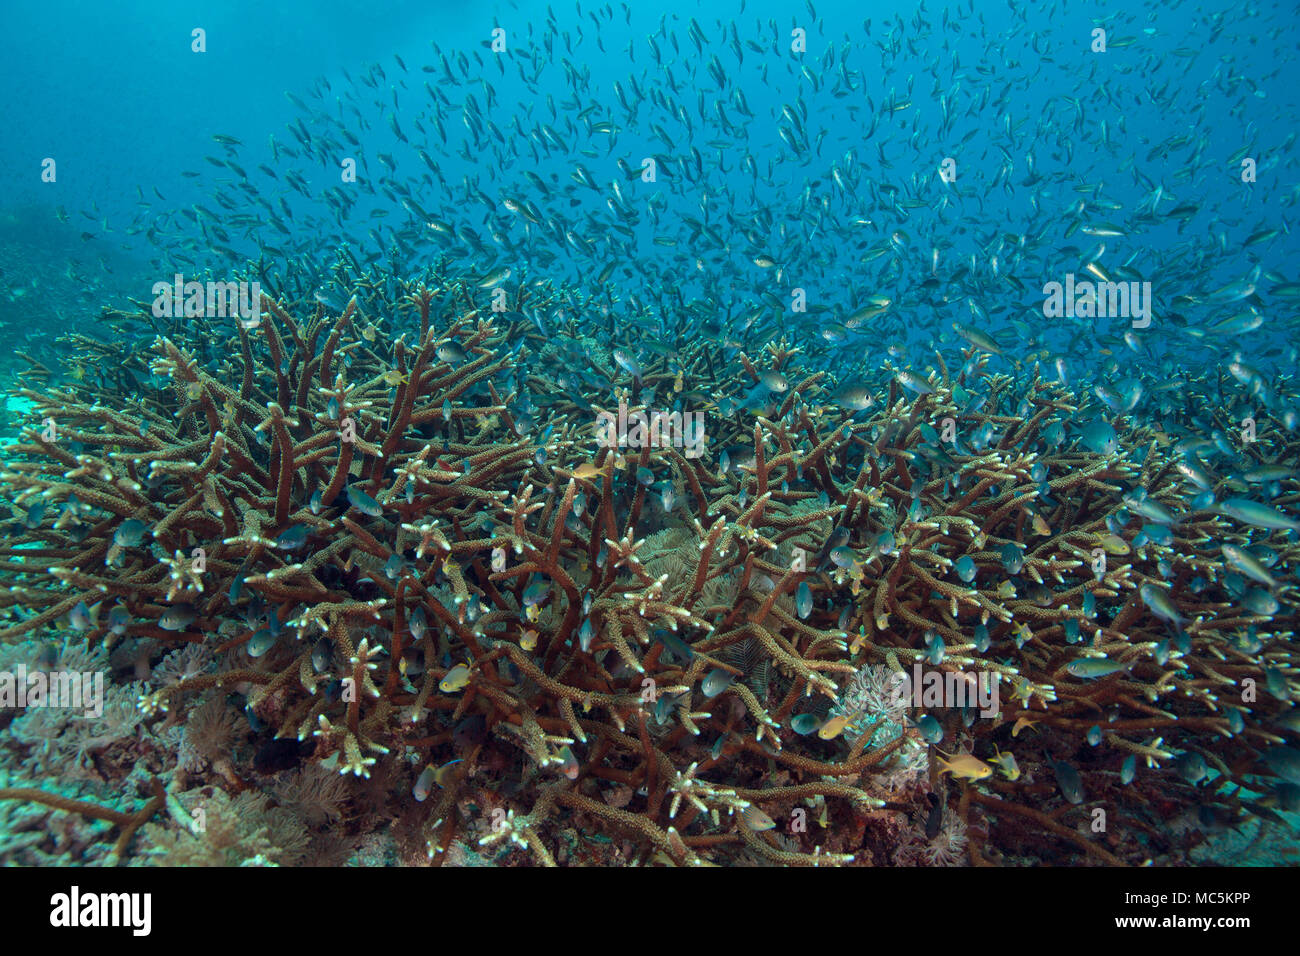 The staghorn coral (Acropora cervicornis). Picture was taken in the Ceram sea, Raja Ampat, West Papua, Indonesia Stock Photo